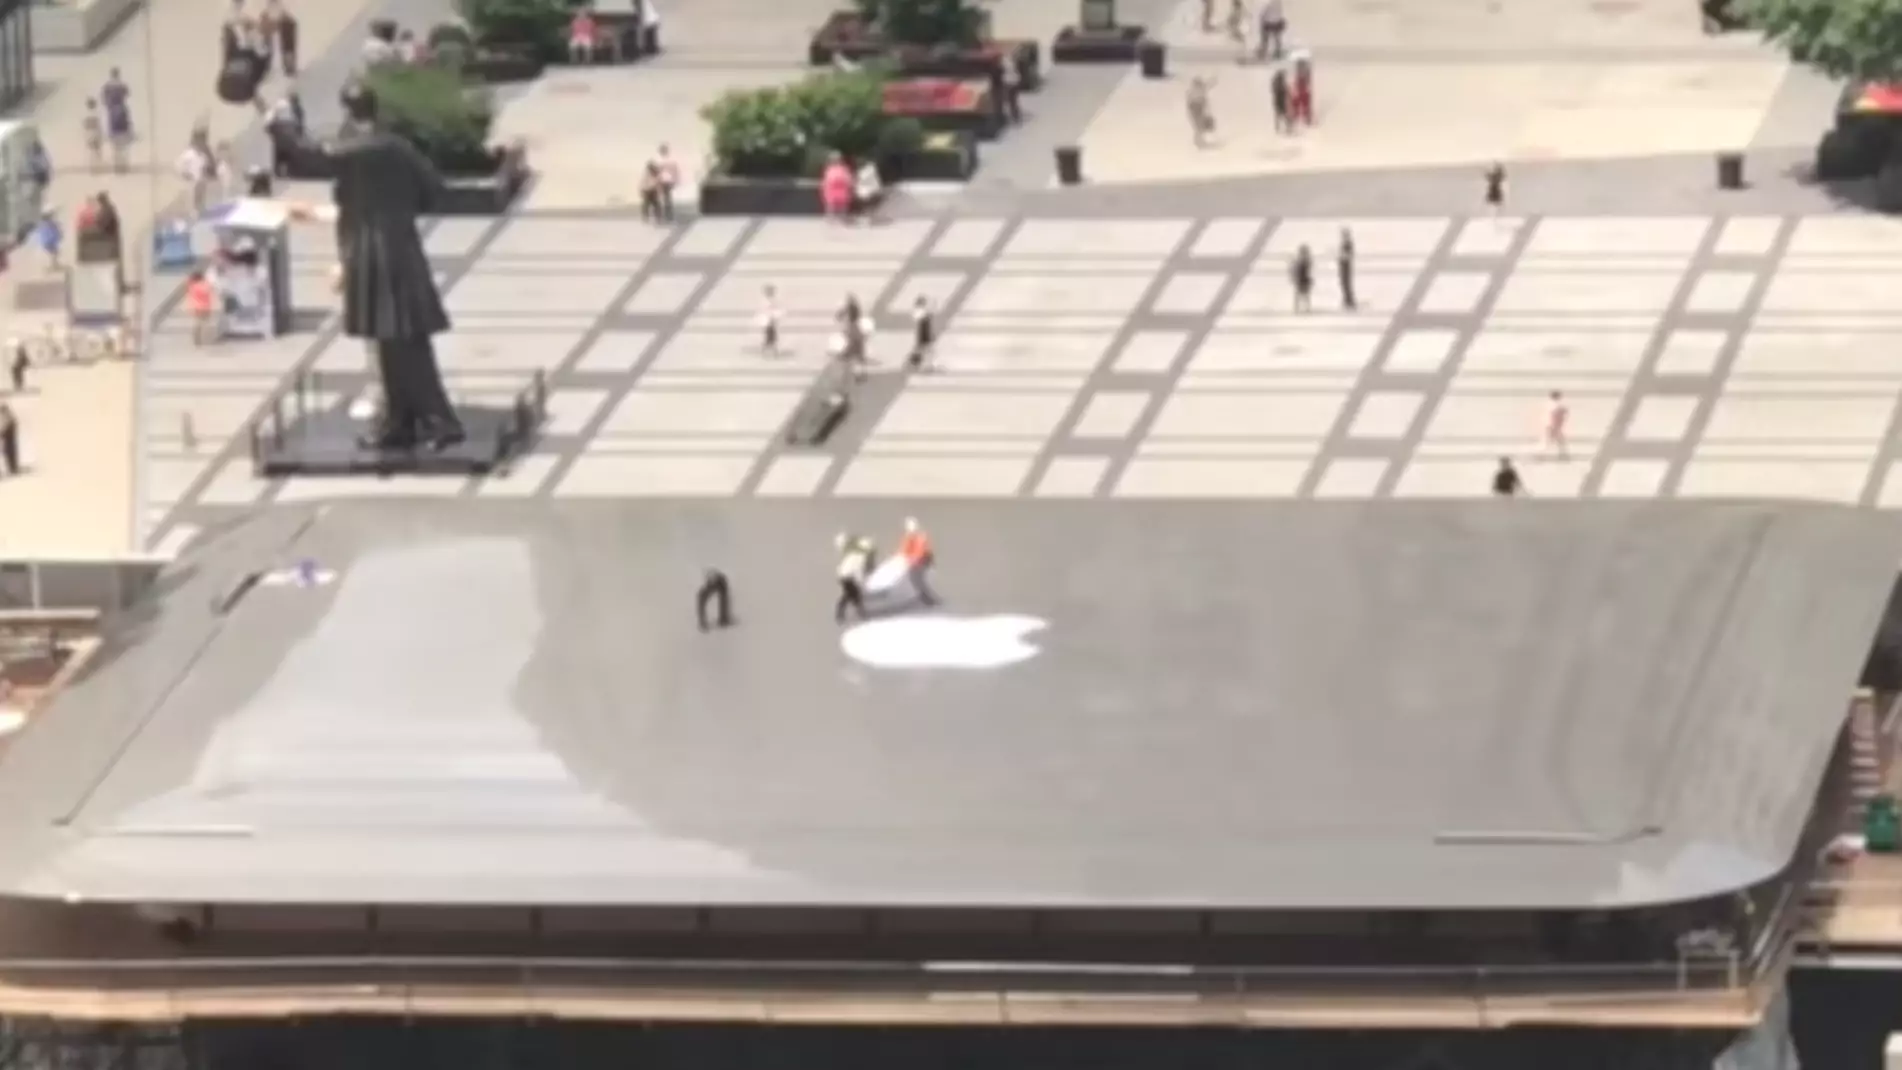 New Apple Store In Chicago Has Giant MacBook For Roof